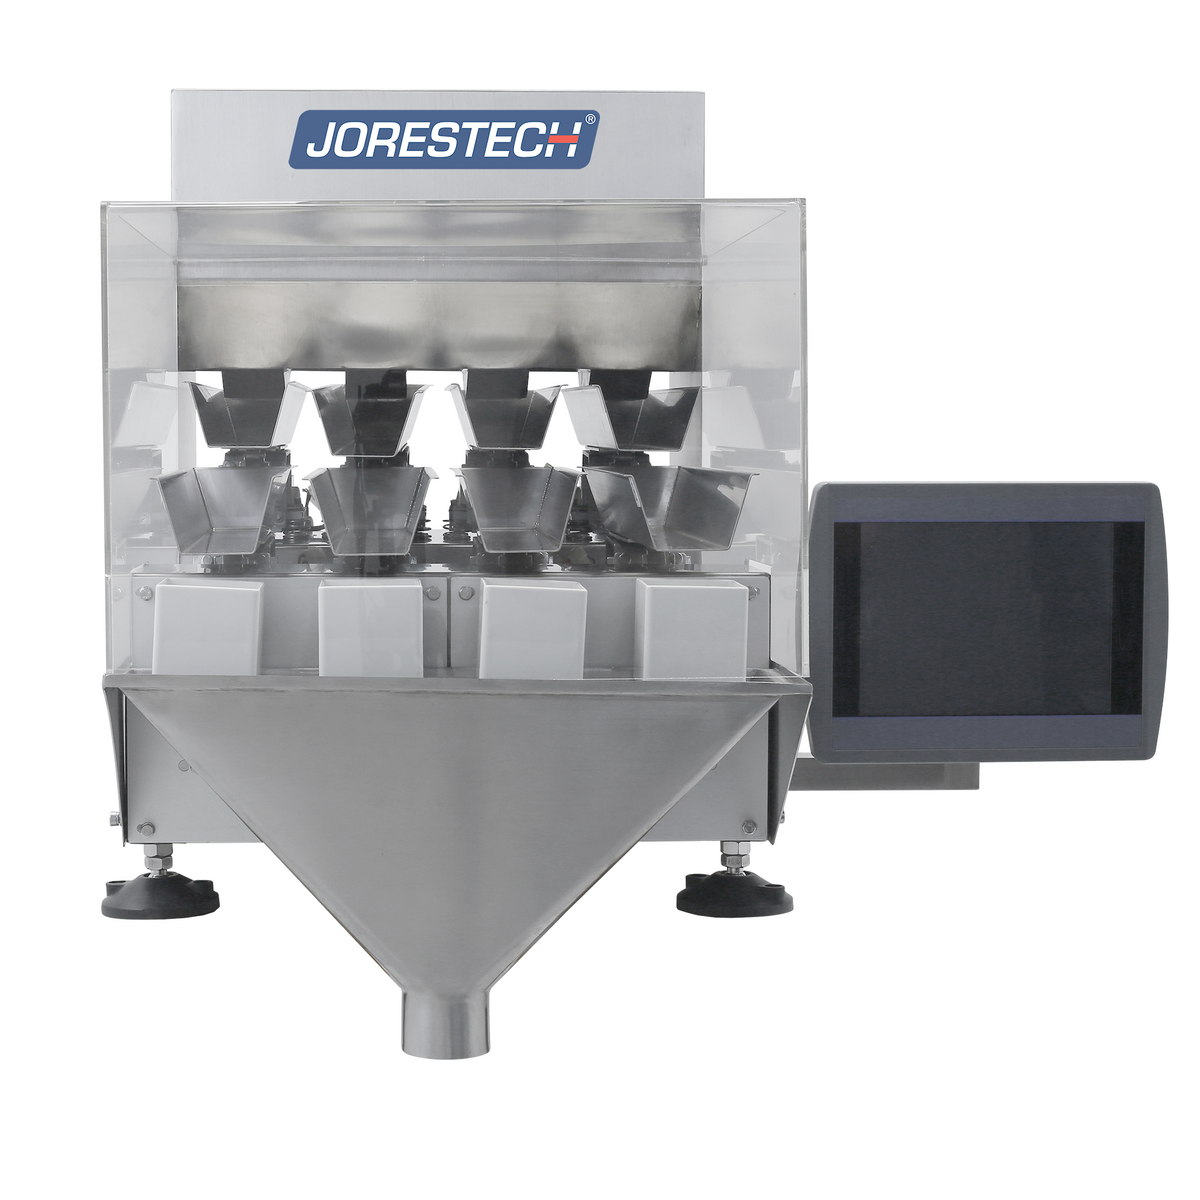 Tabletop Bag Sealing Machine with Pedal Activation | Technopack Corp. by JORES Technologies